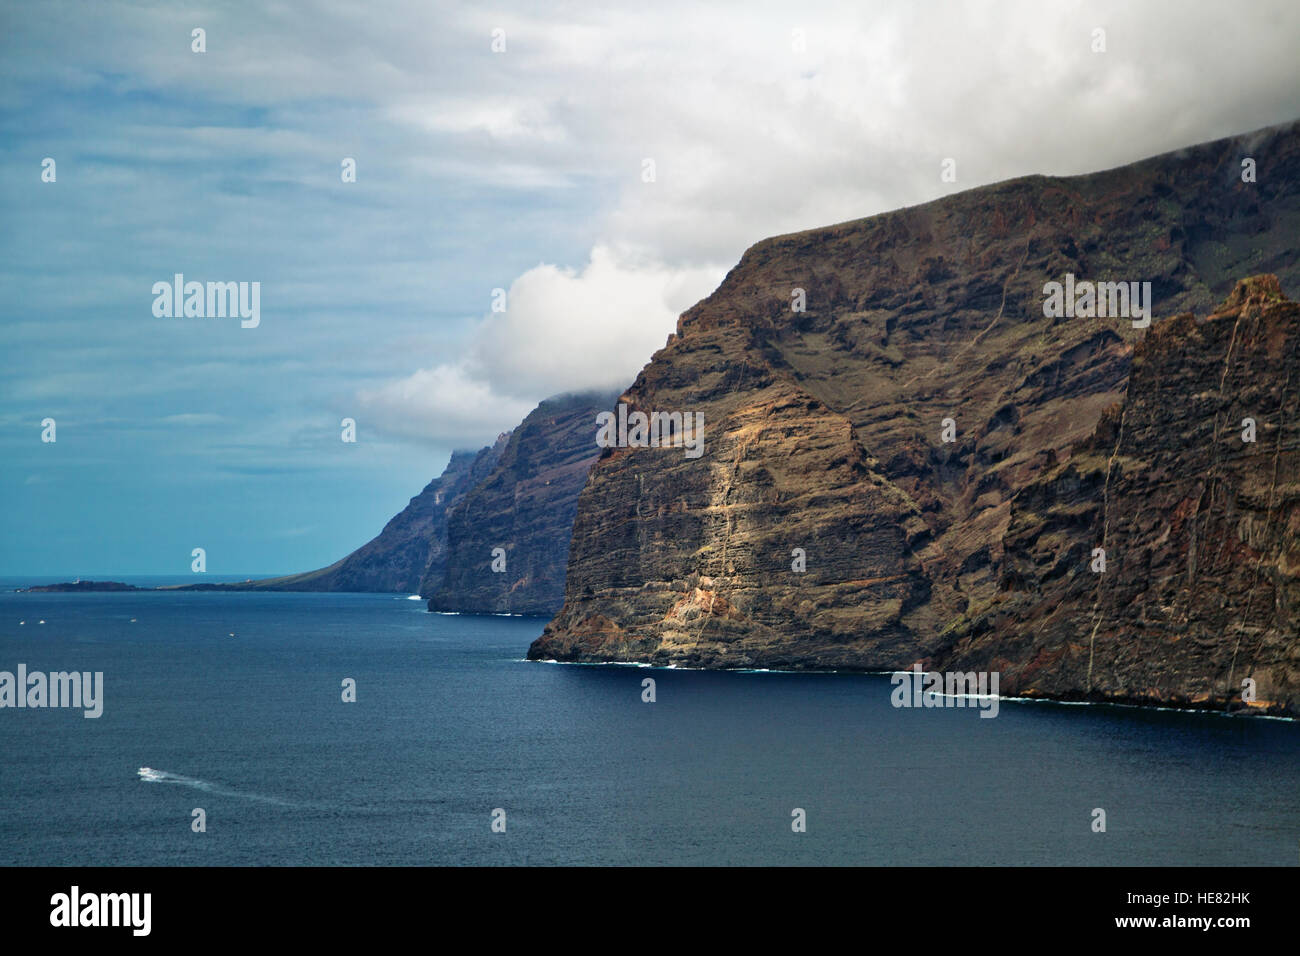 View of Los Gigantes cliffs. Tenerife, Canary Islands, Spain Stock Photo